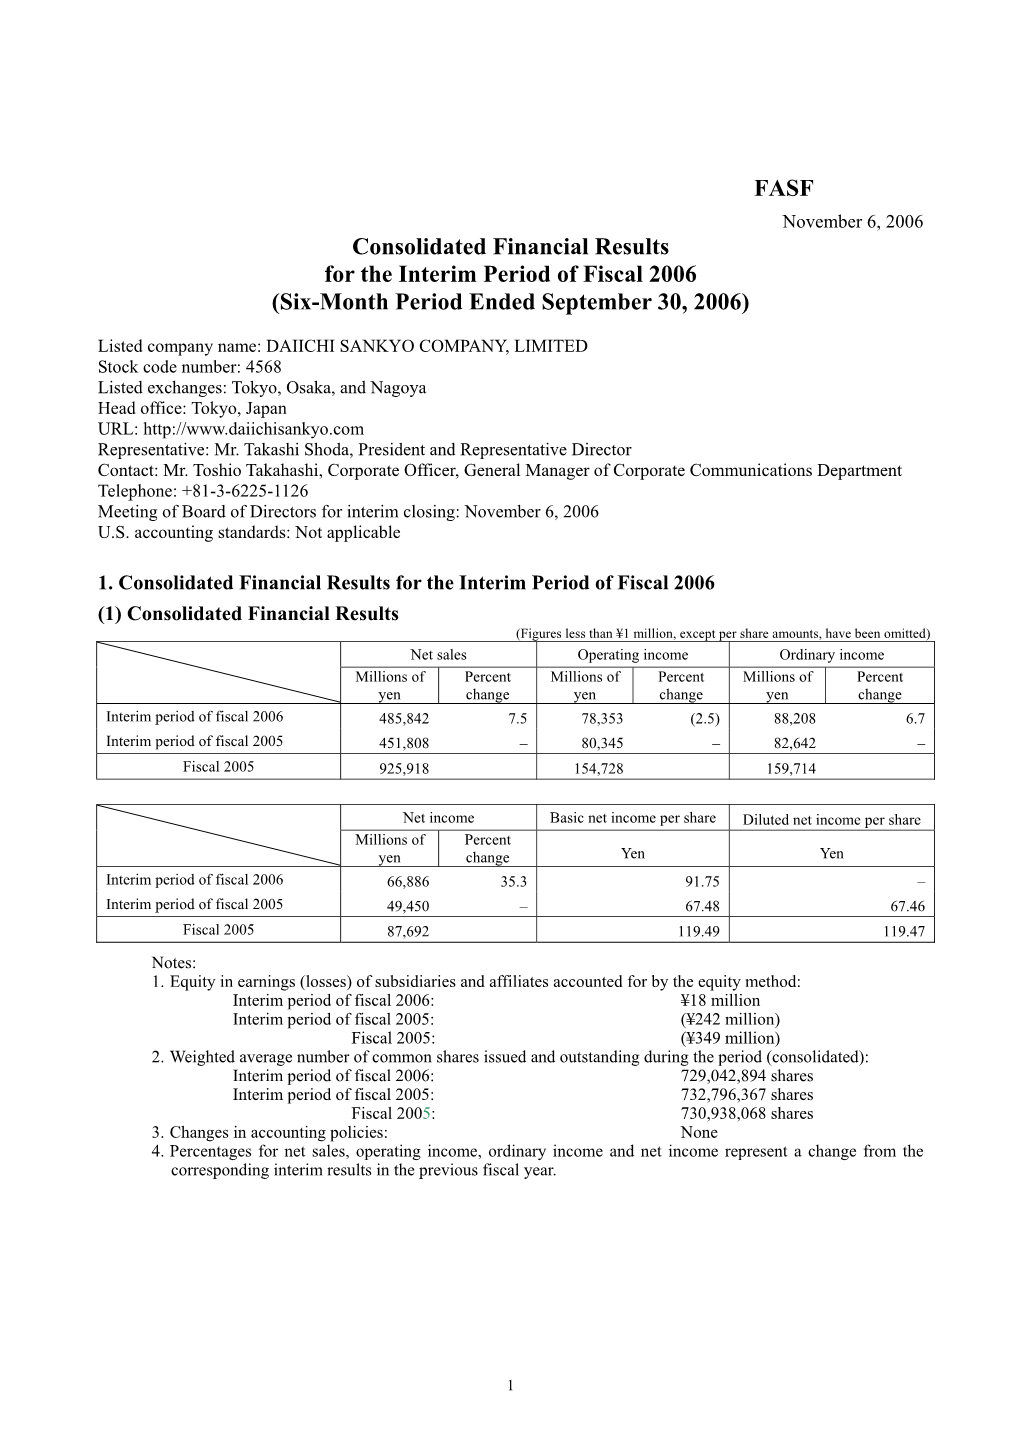 Consolidated Financial Results for the Interim Period of Fiscal 2006 (Six-Month Period Ended September 30, 2006)